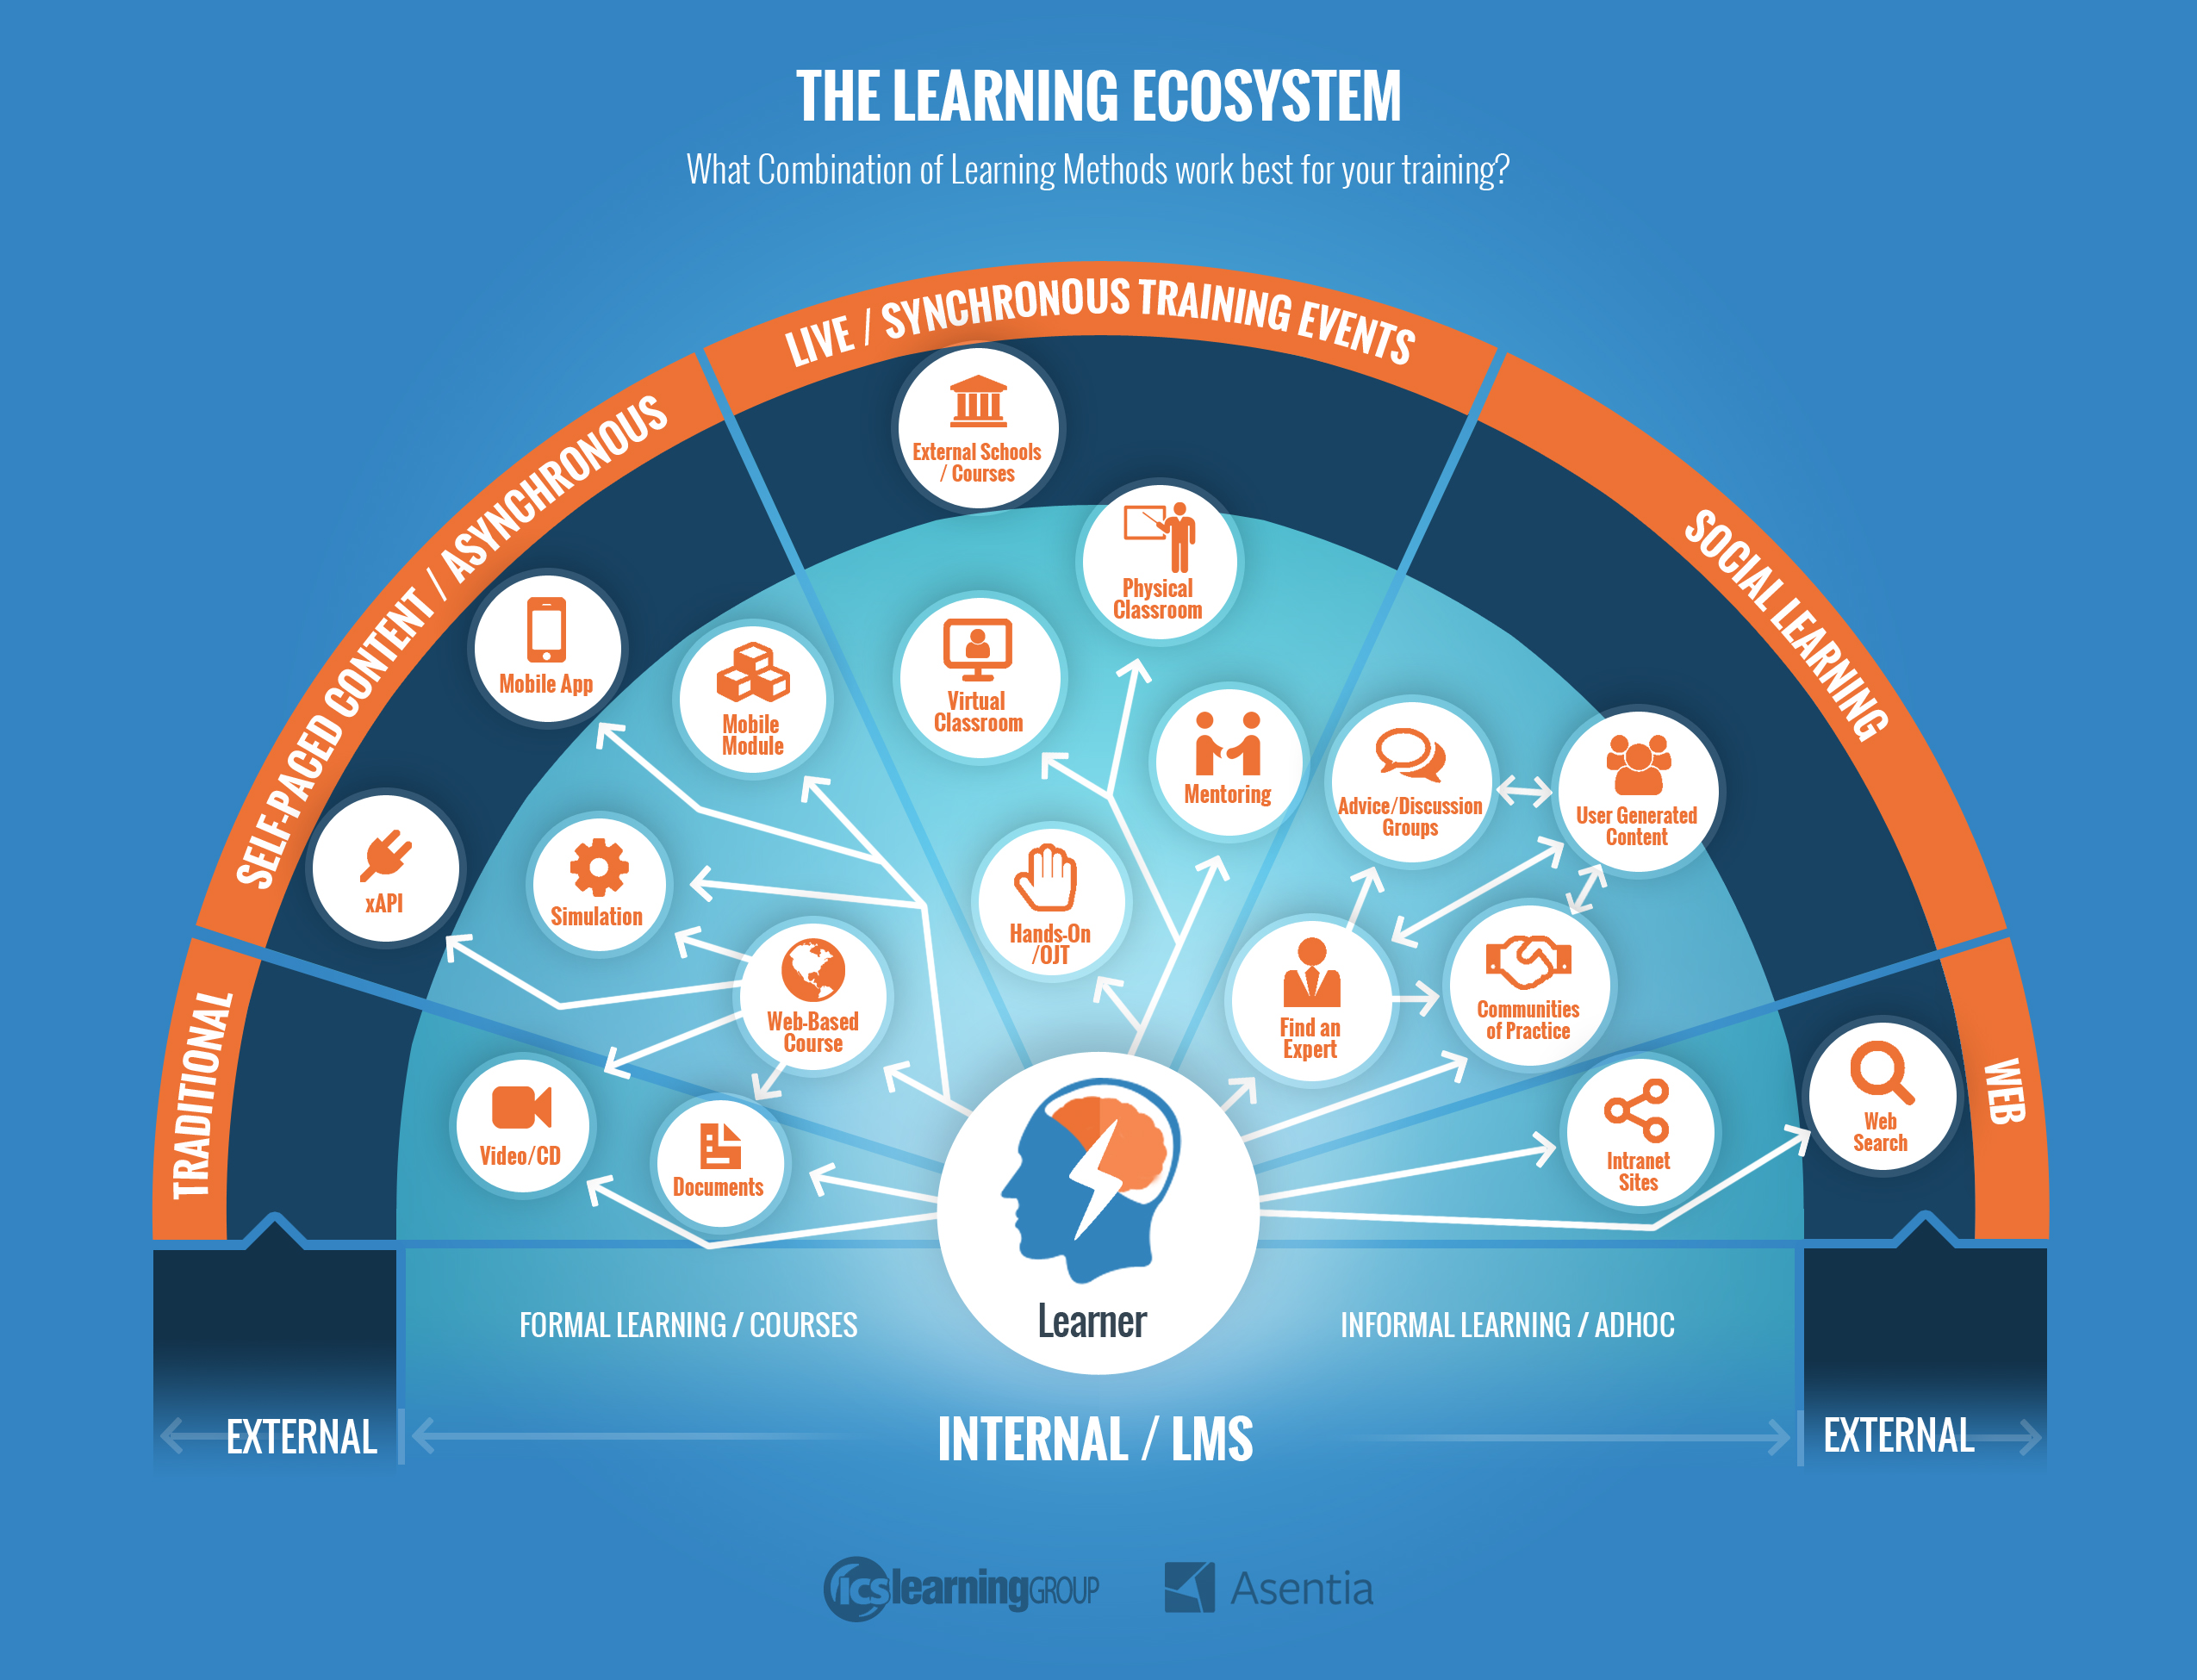 The Learning Ecosystem